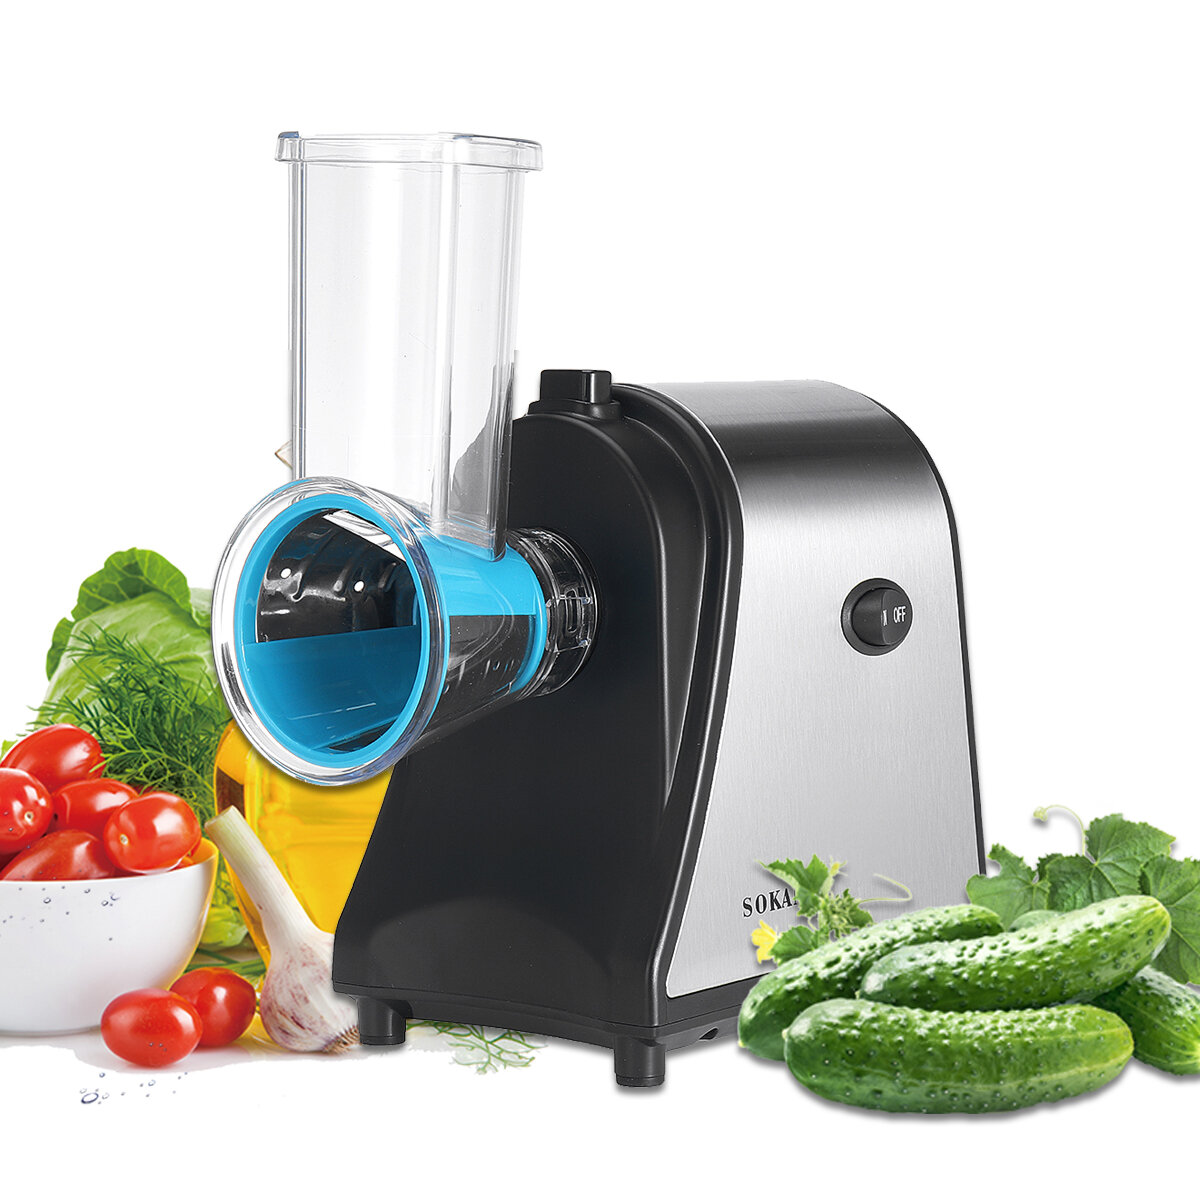 Image of 1000W 6 in 1 Electric Salad Maker Fruit Slicer Cutter Vegetable Grater Cheese Chopper 5 Different Cone Blades